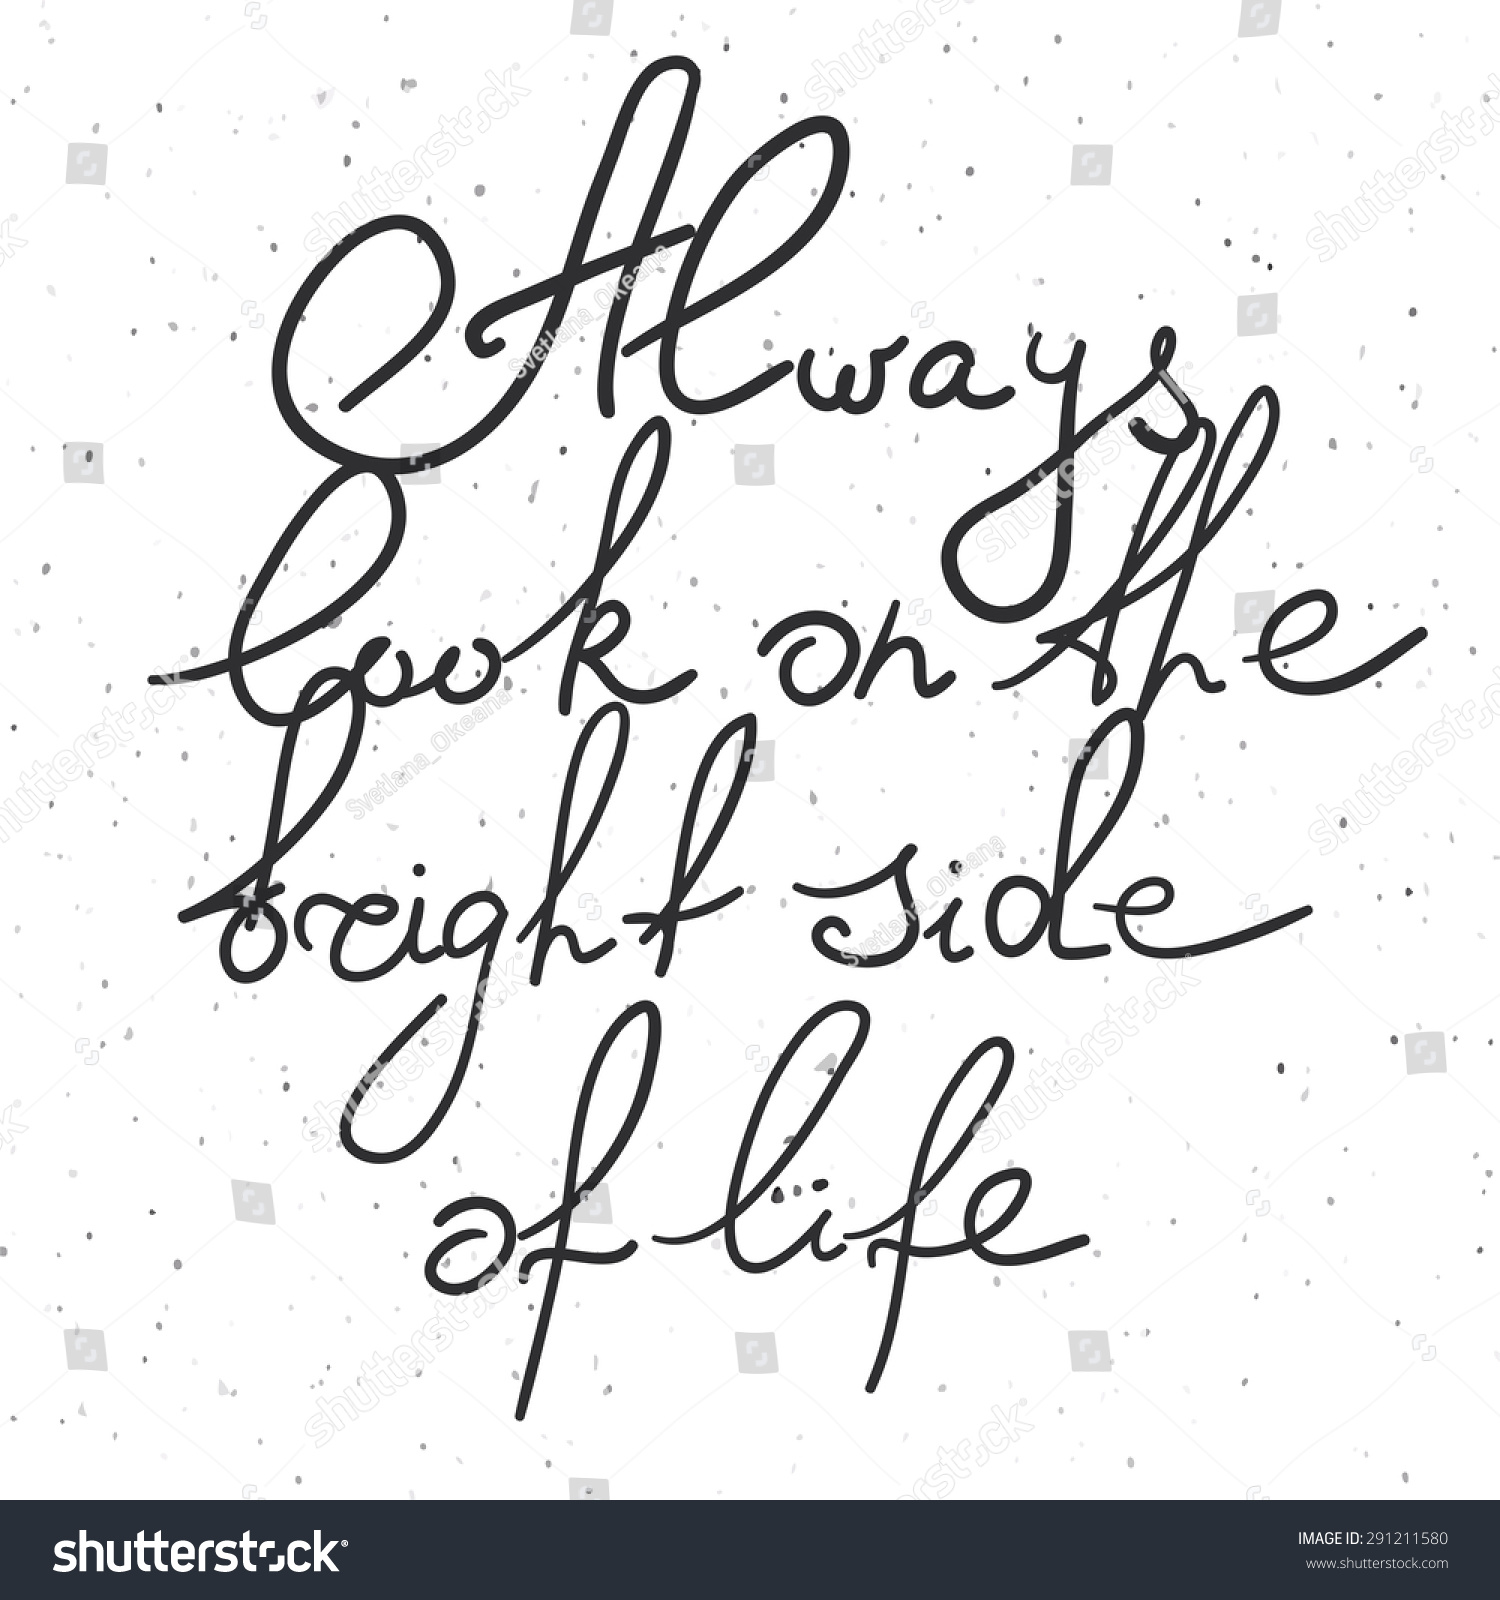 Motivational quote "Always look on the bright side of life